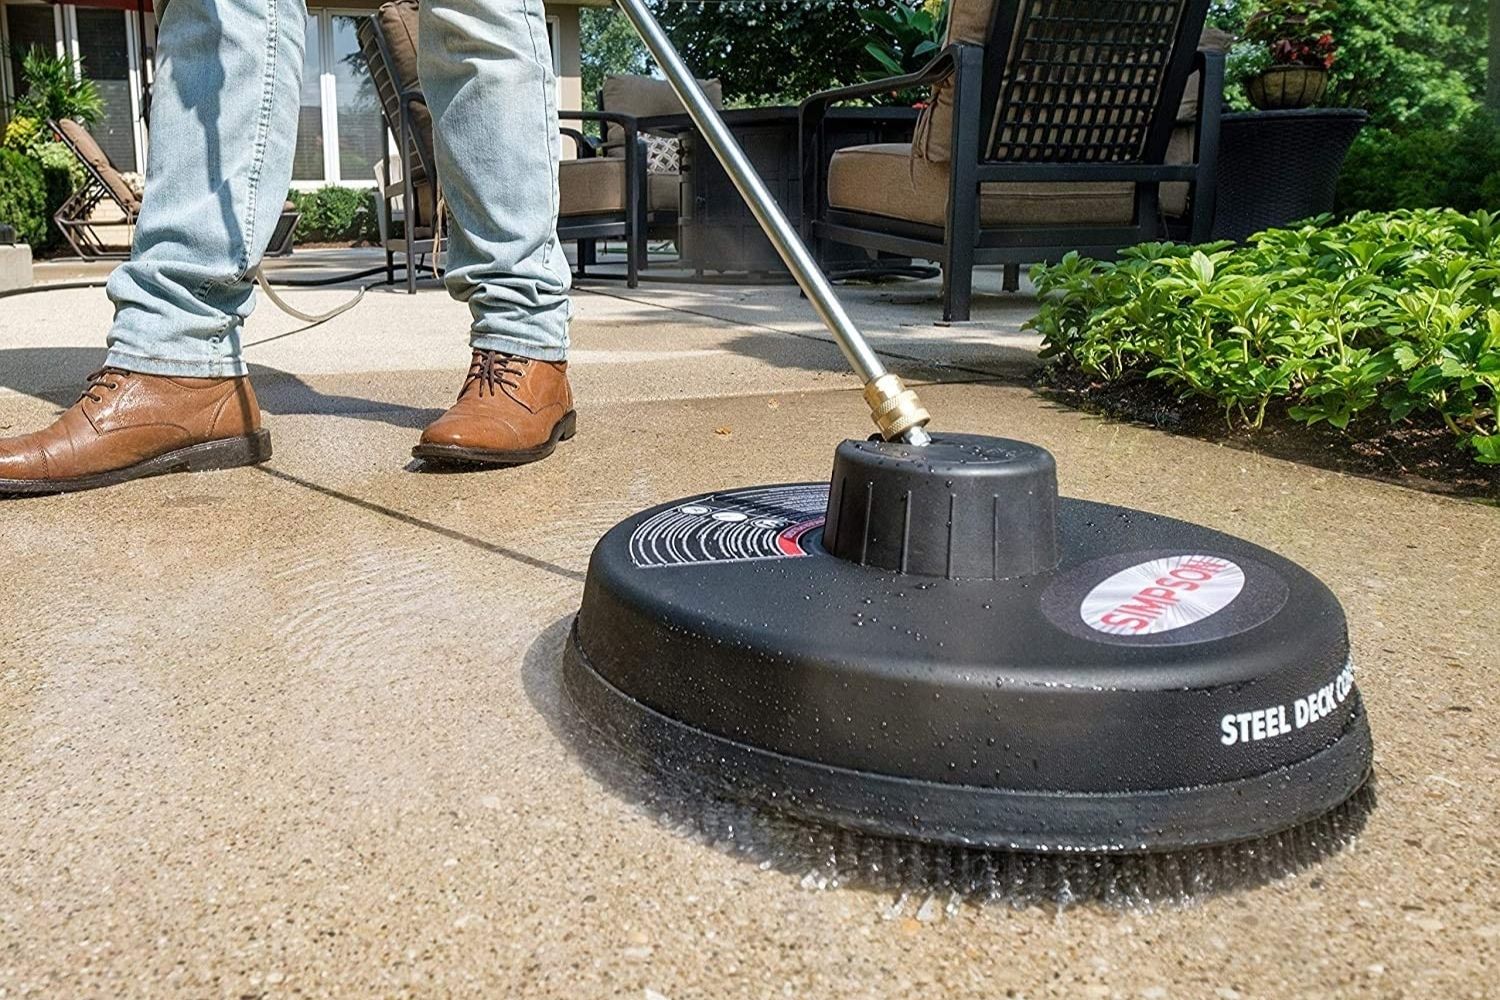 A person using the best gas pressure washer option to clean a cement patio